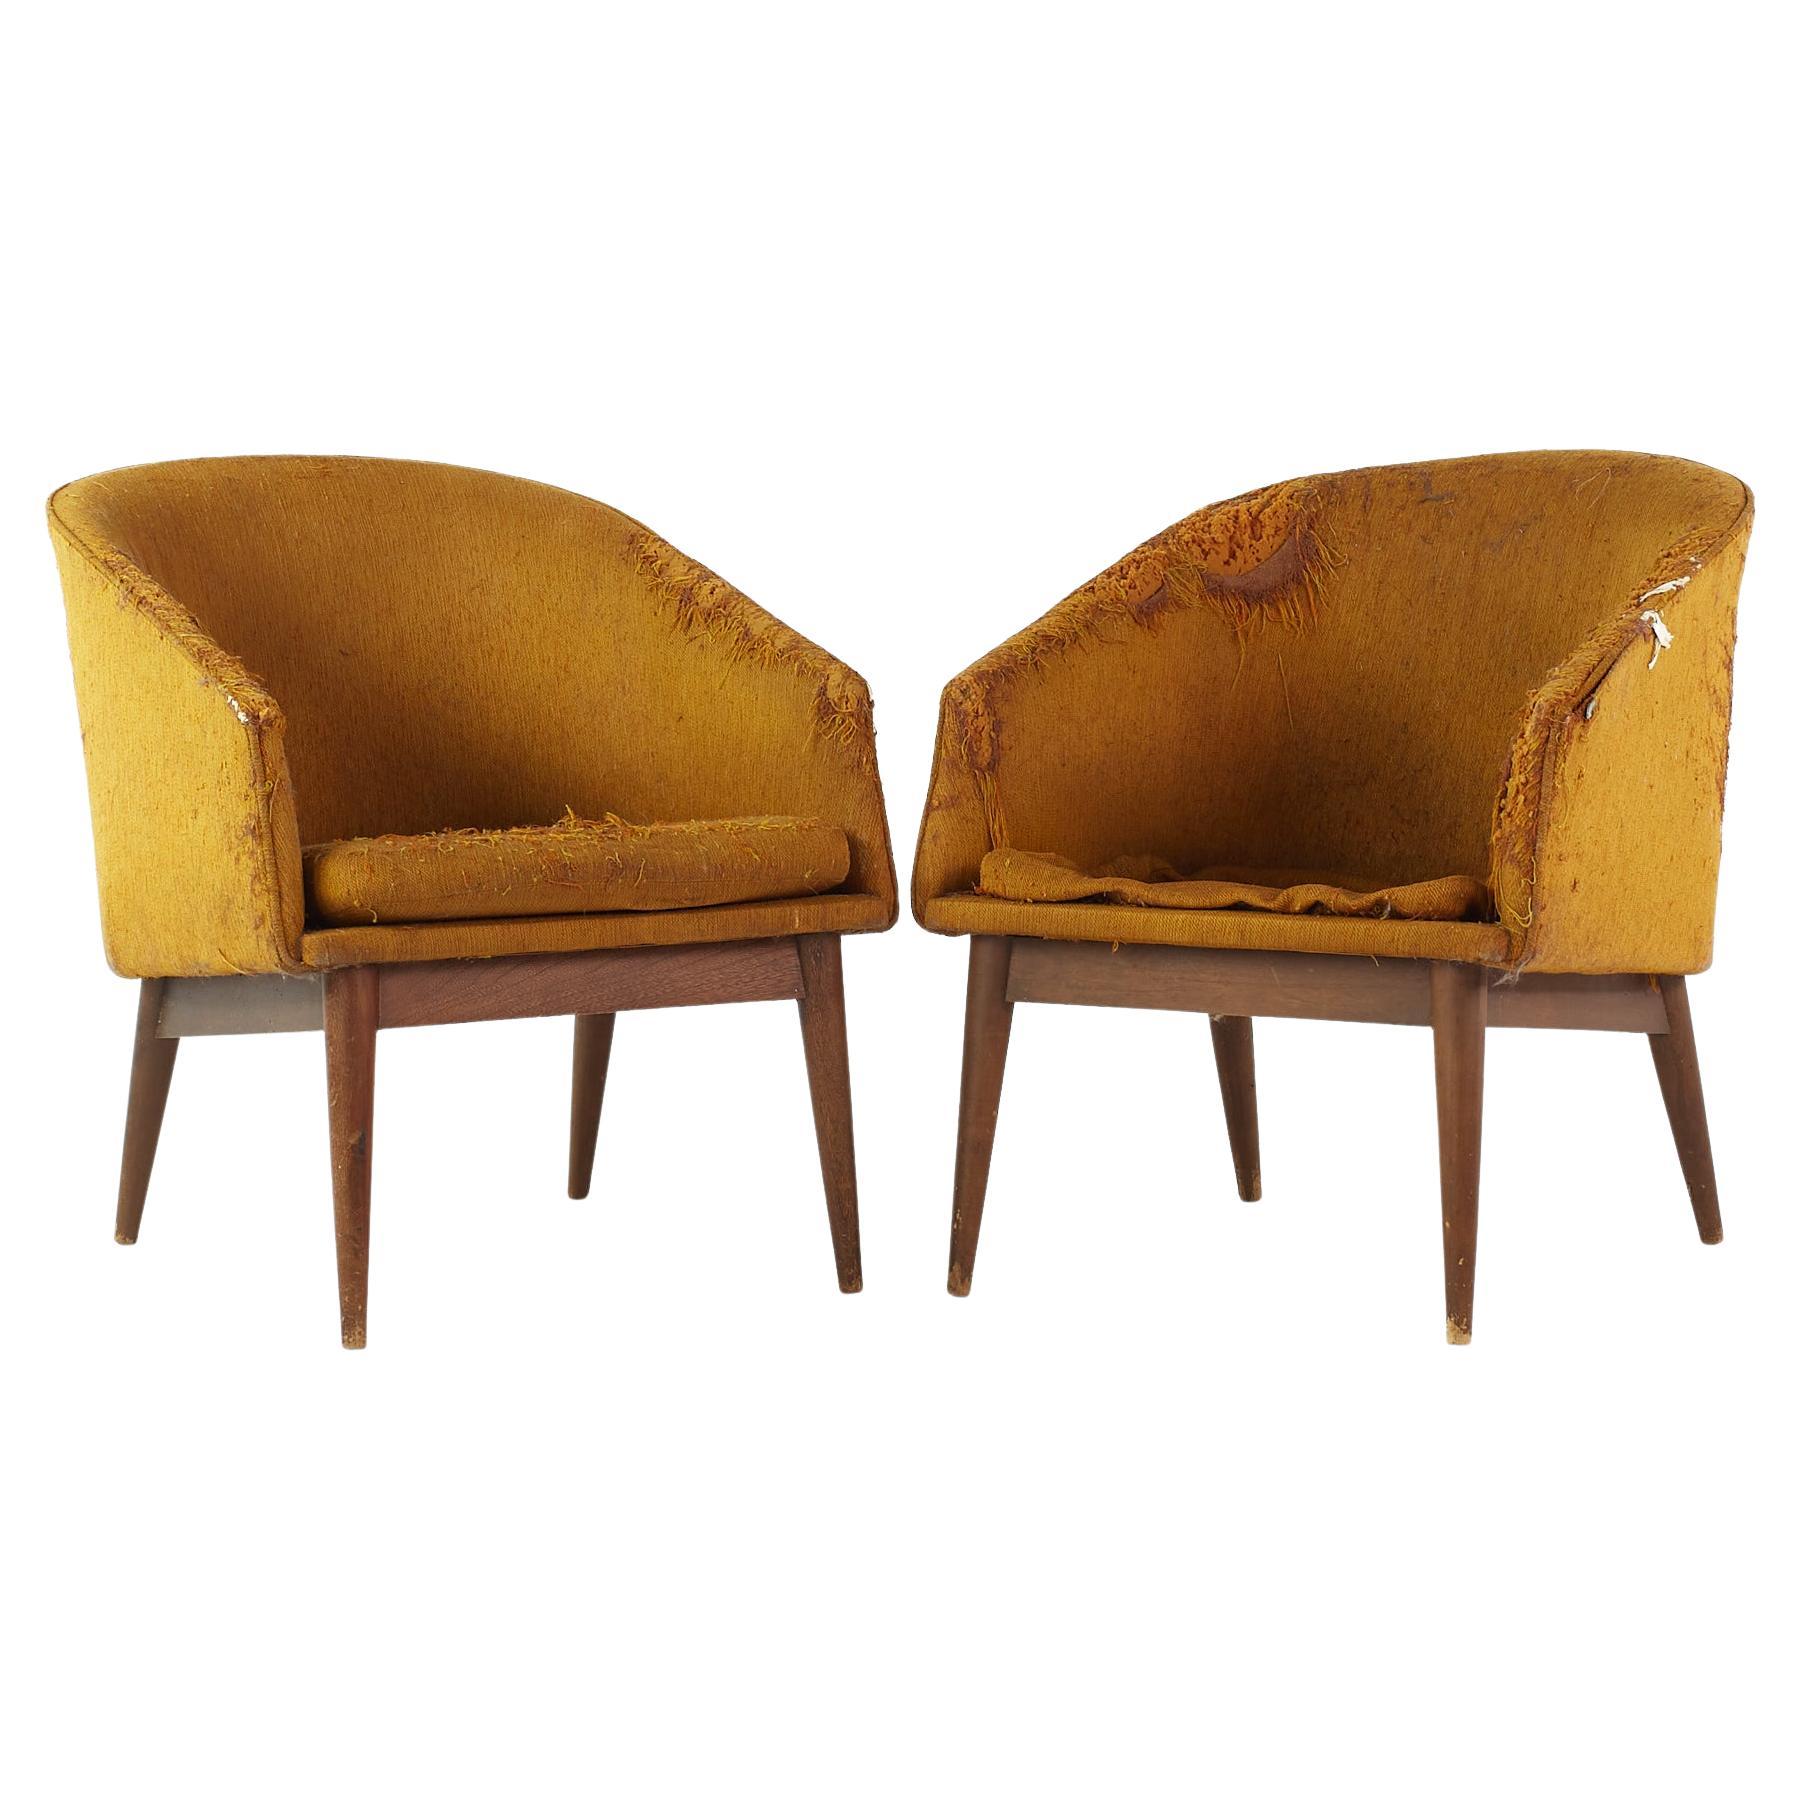 Lawrence Peabody for Craft Associates Mid Century Walnut Lounge Chairs, Pair